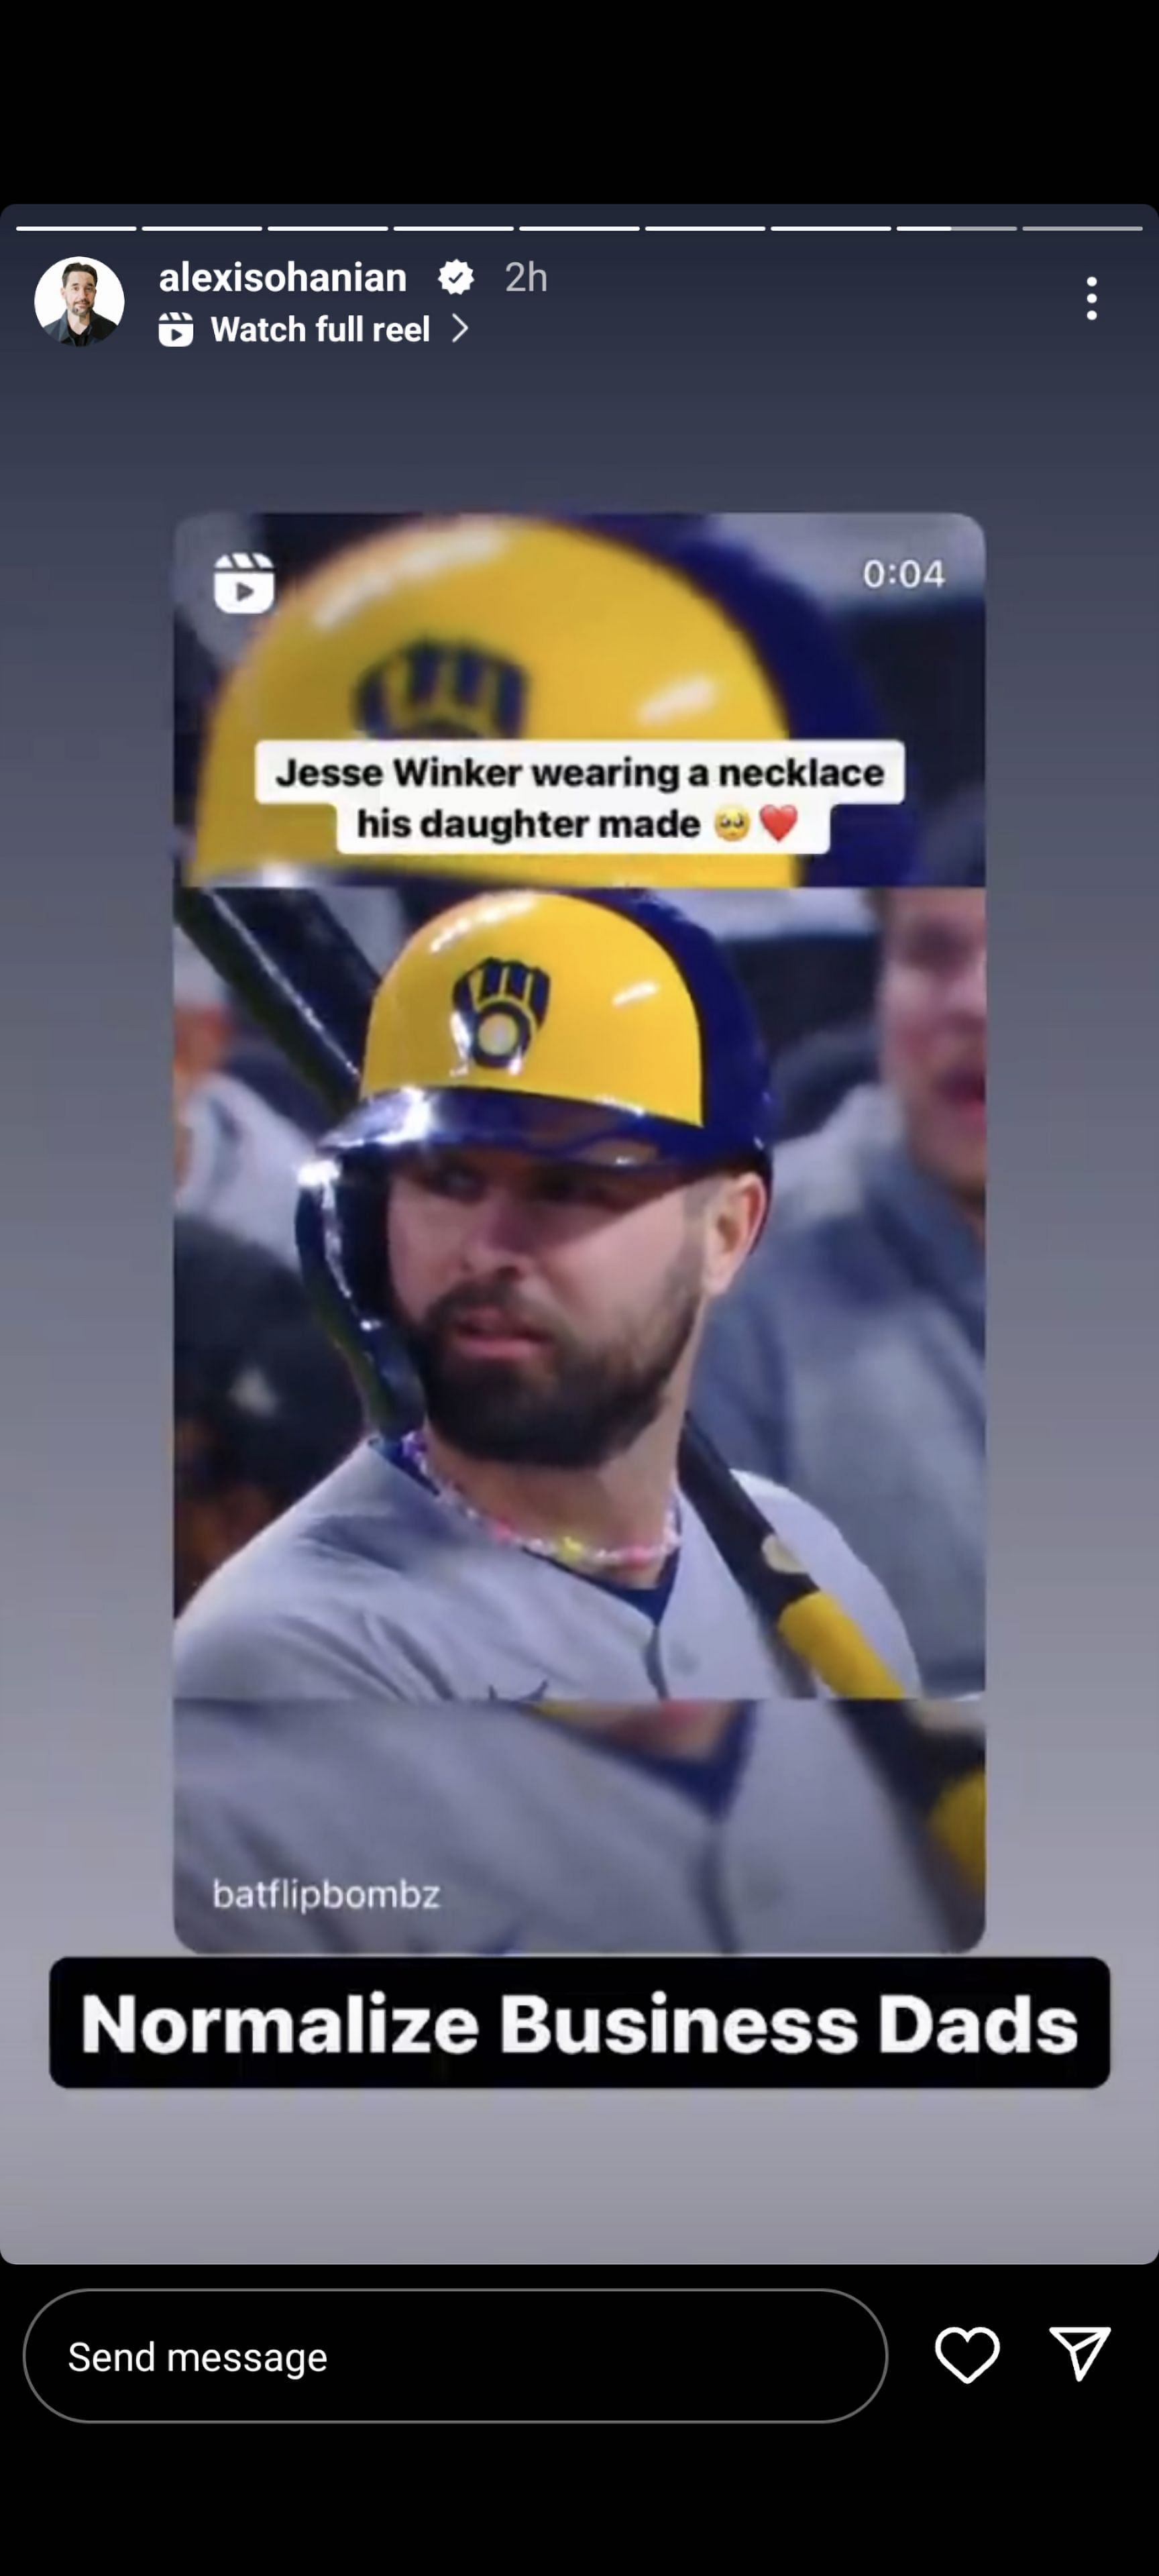 Serena Williams' husband Alexis Ohanian commends Jesse Winker for wearing  necklace made by his daughter during baseball game